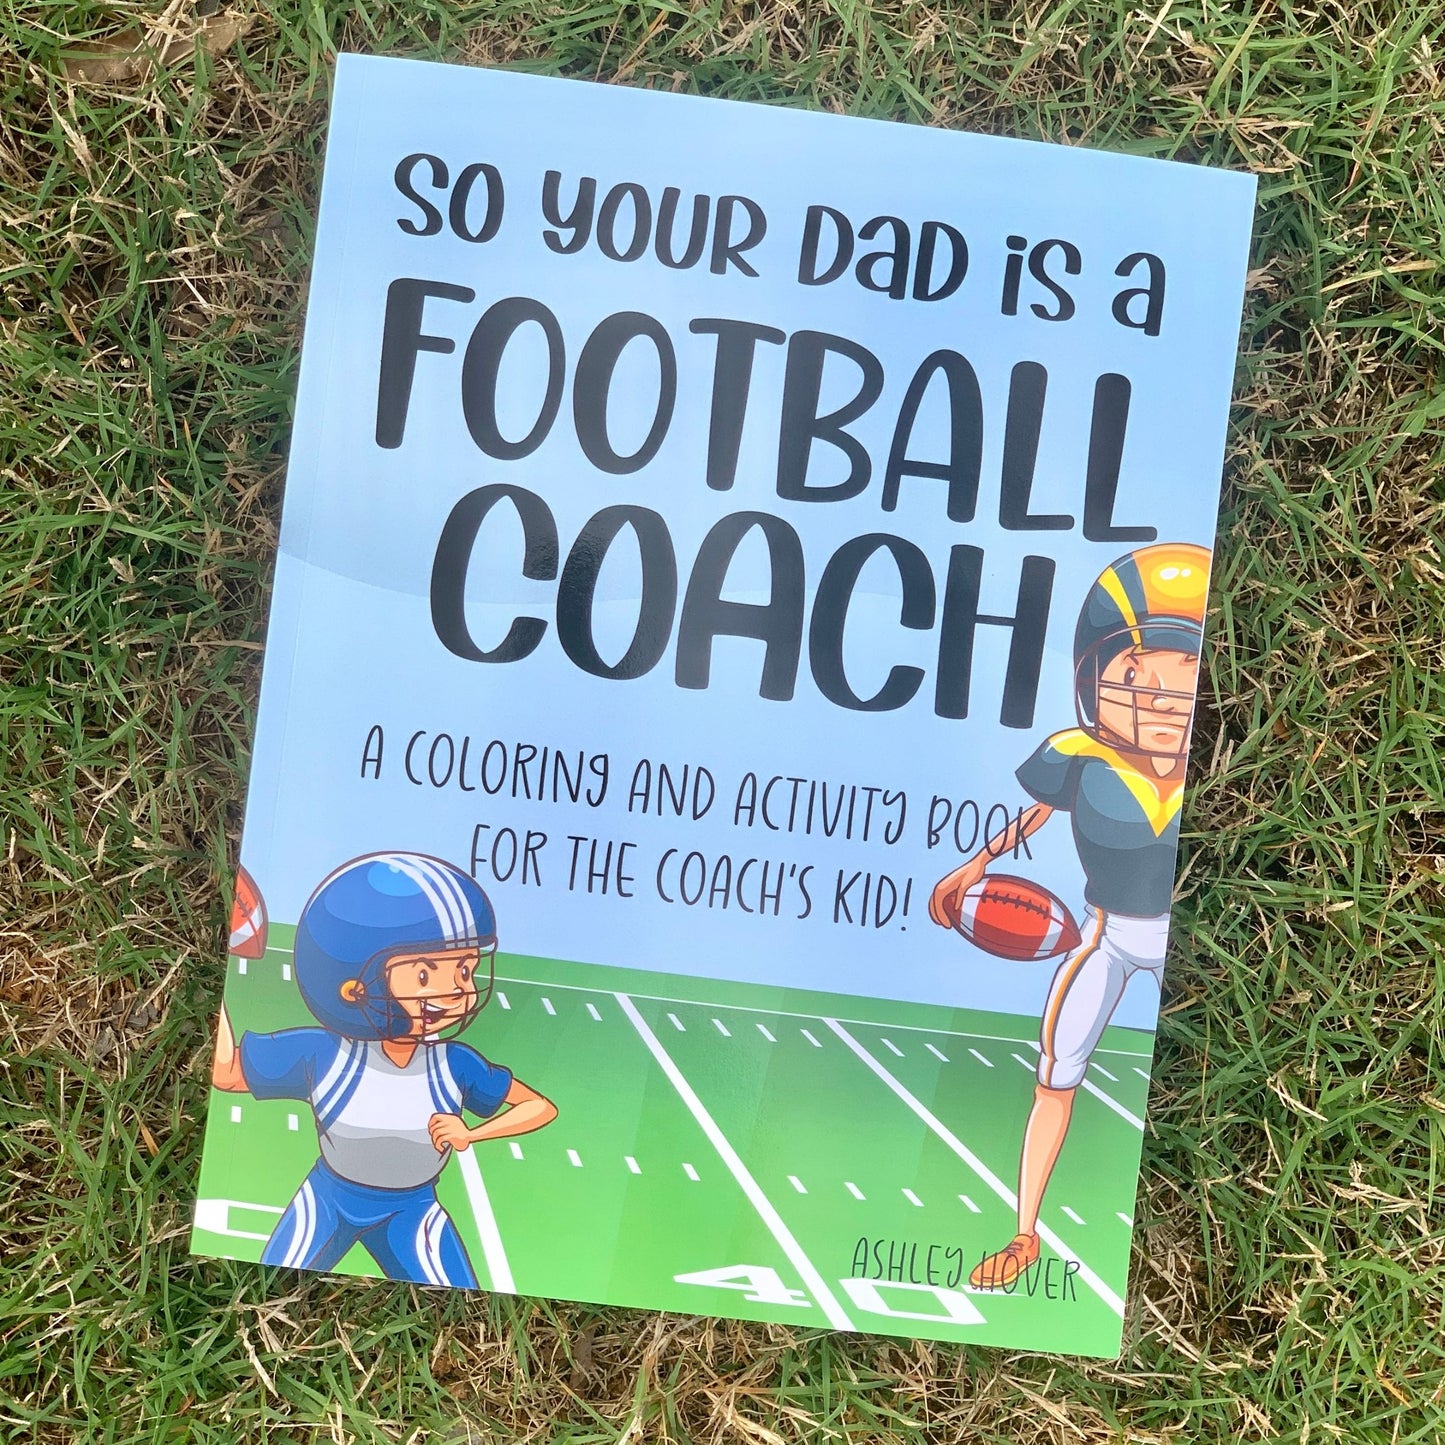 So Your Dad Is A Football Coach: A Coloring and Activity Book for the Coach's Kid